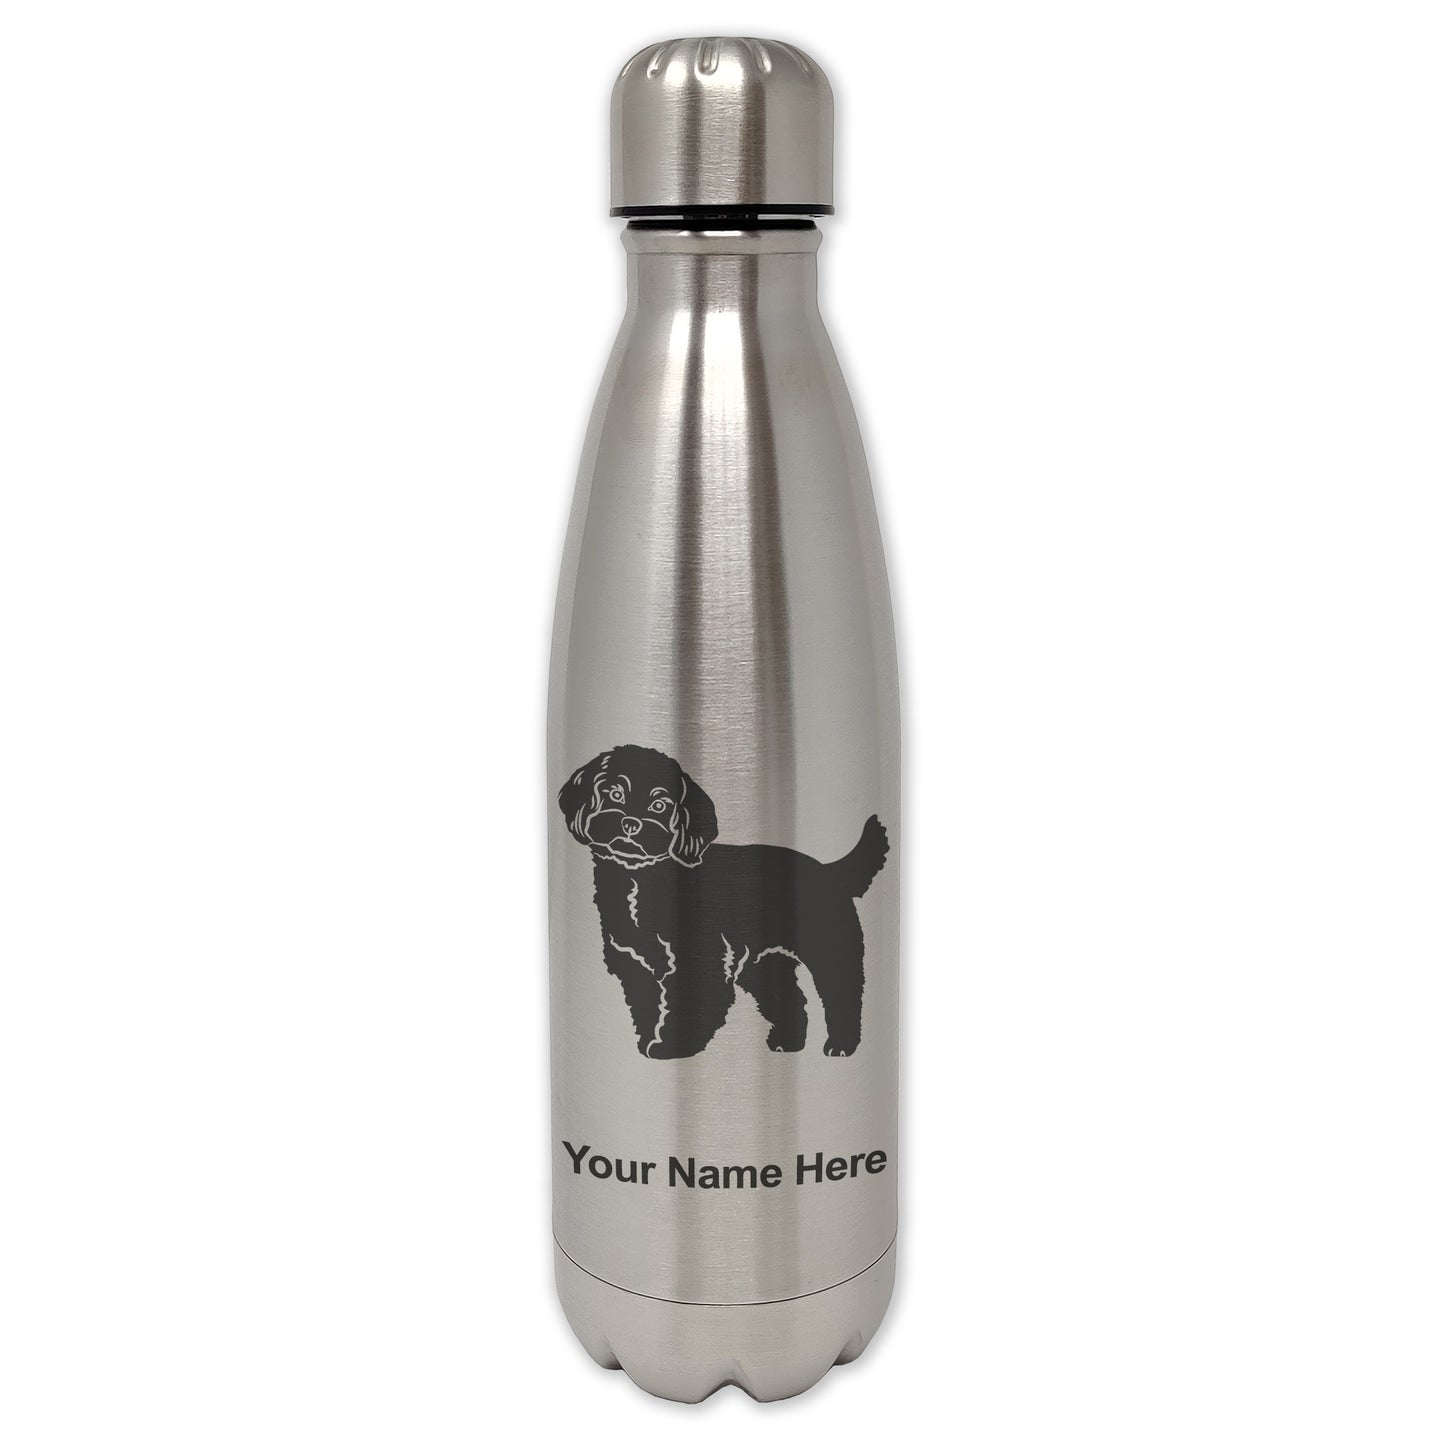 LaserGram Double Wall Water Bottle, Maltese Dog, Personalized Engraving Included